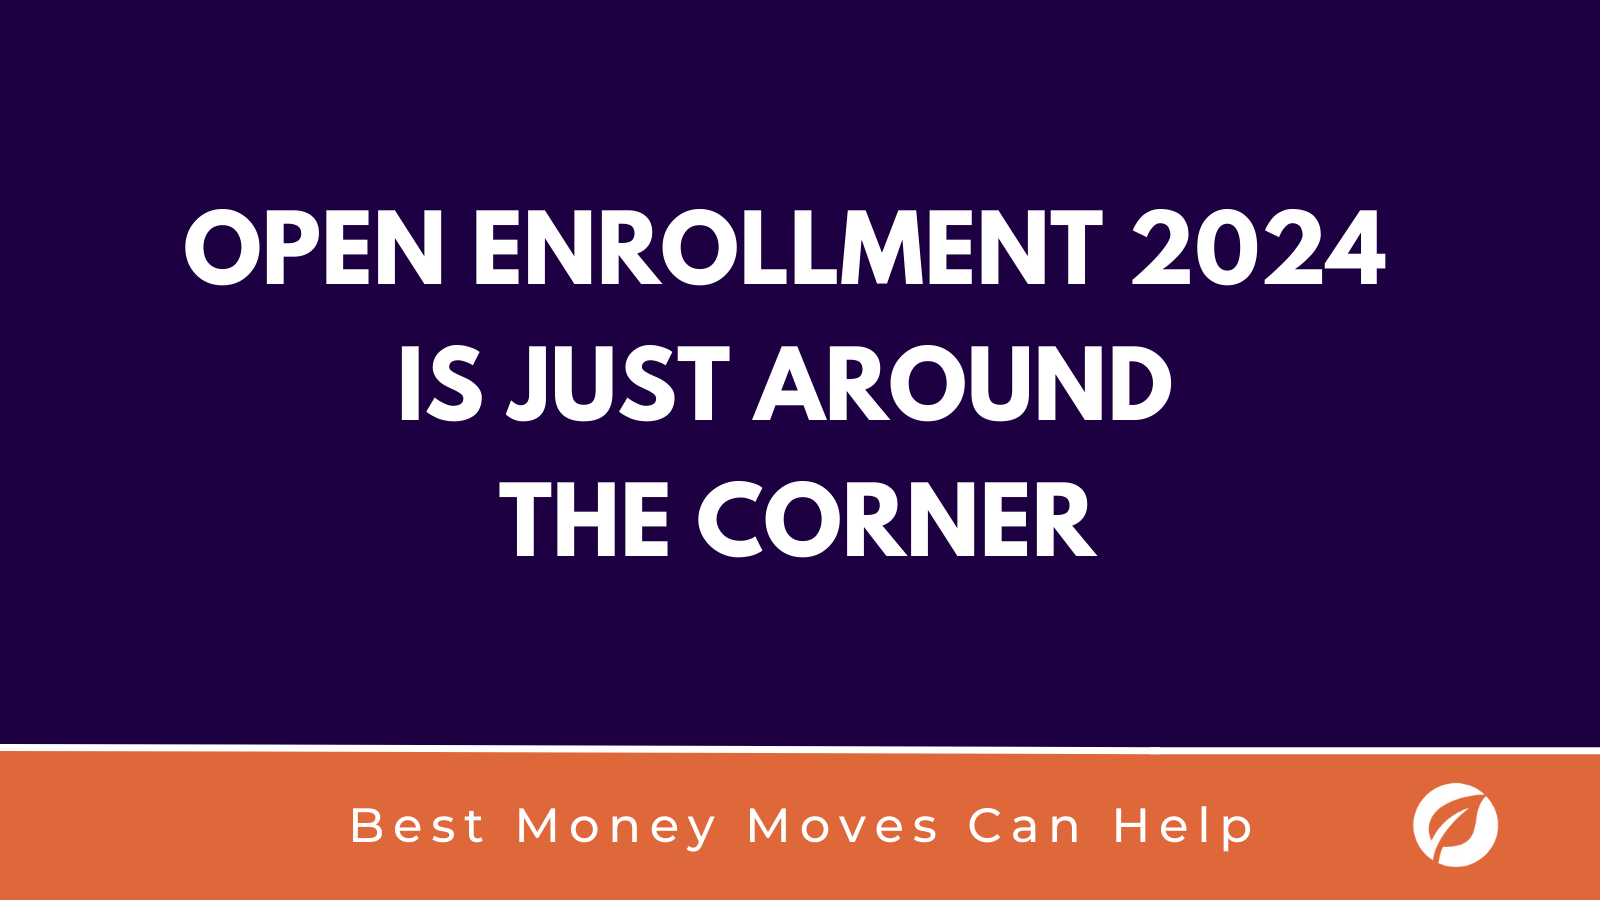 Prepare for Open Enrollment 2024 with Best Money Moves.